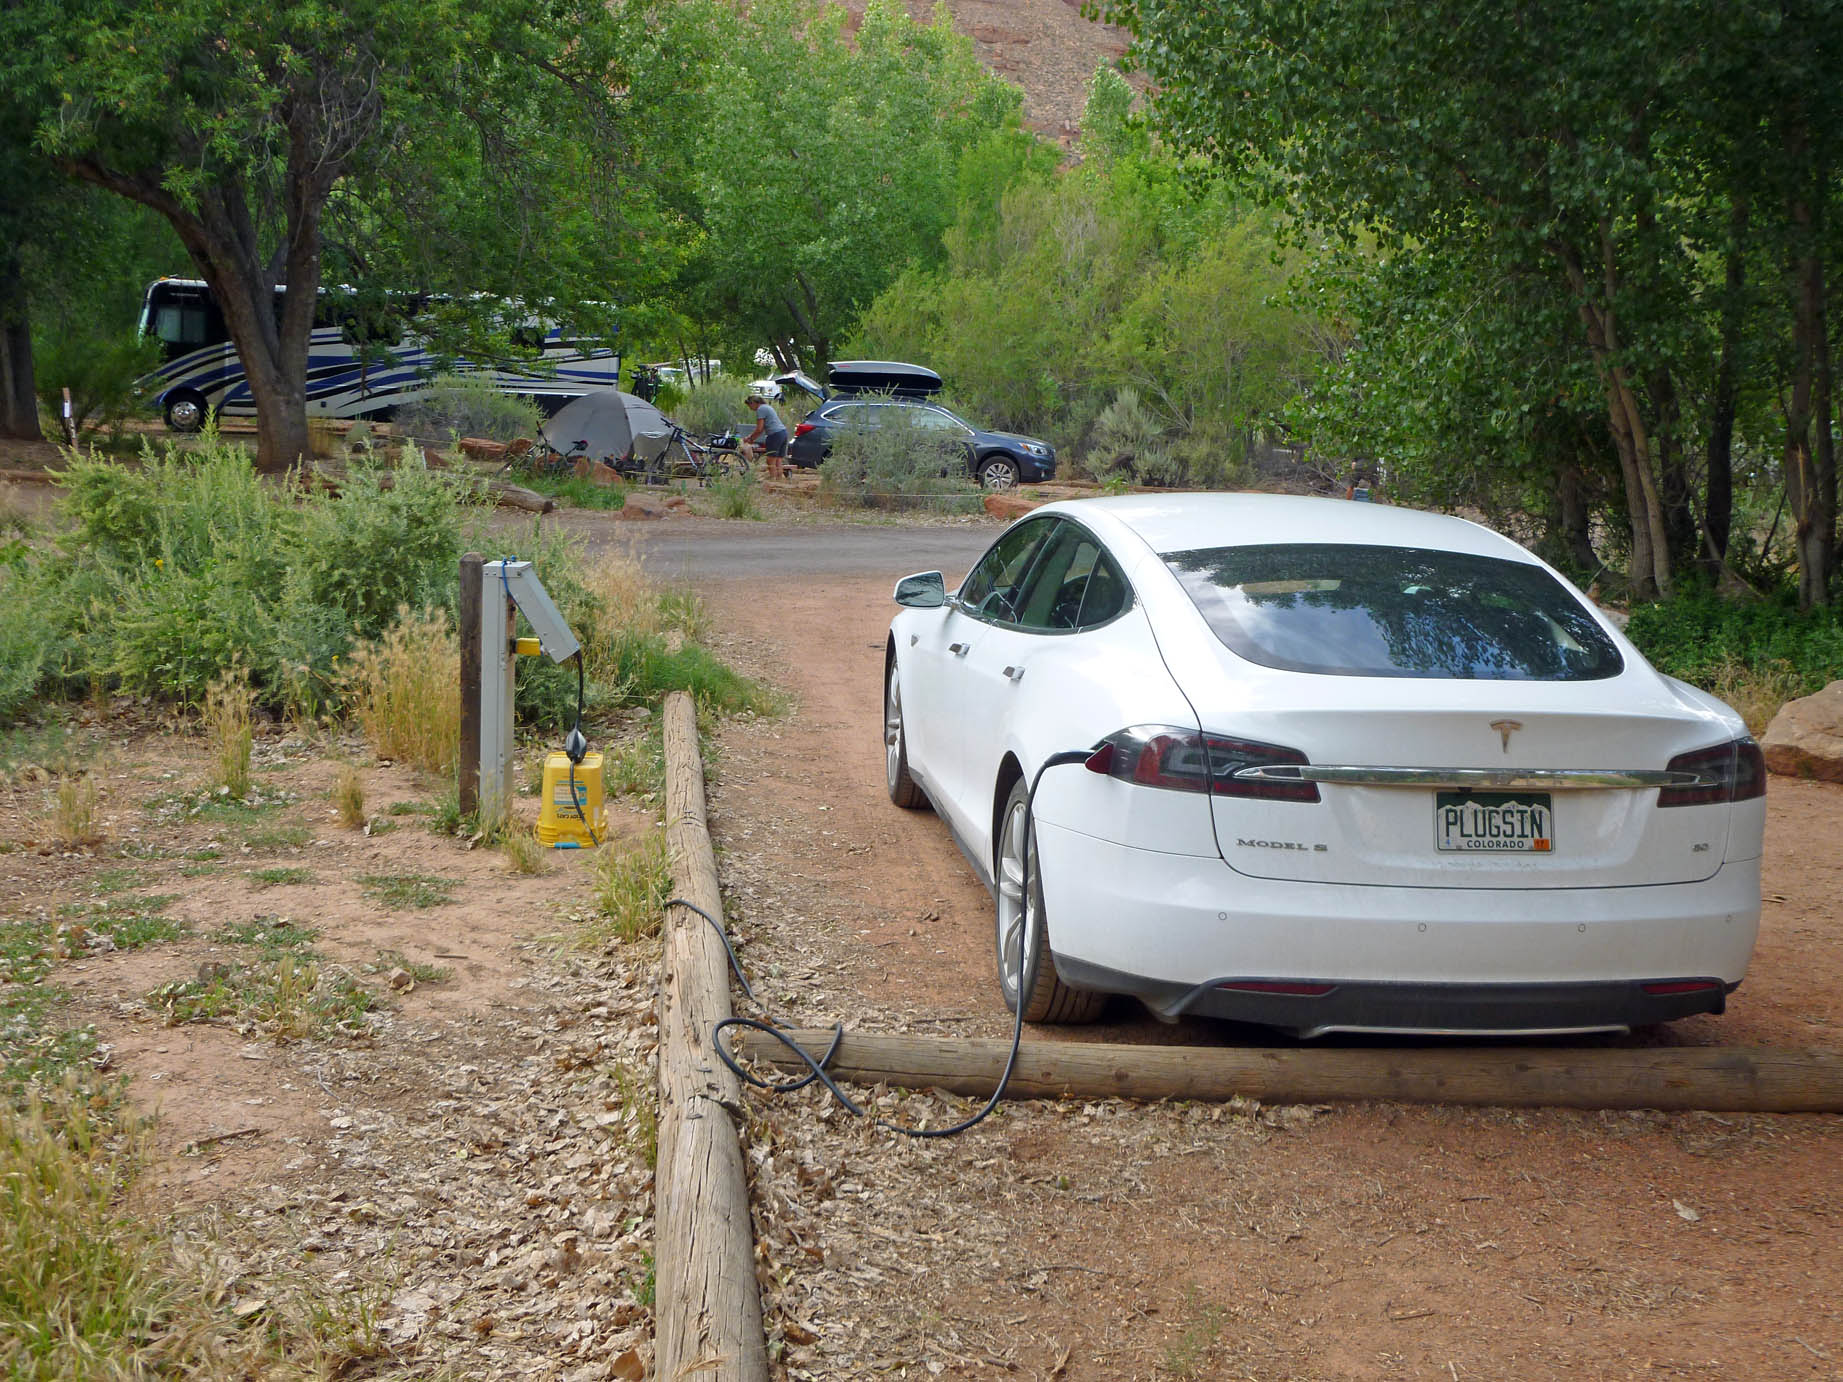 Model S at campsite Zion NP1680sf 6-9-16.jpg